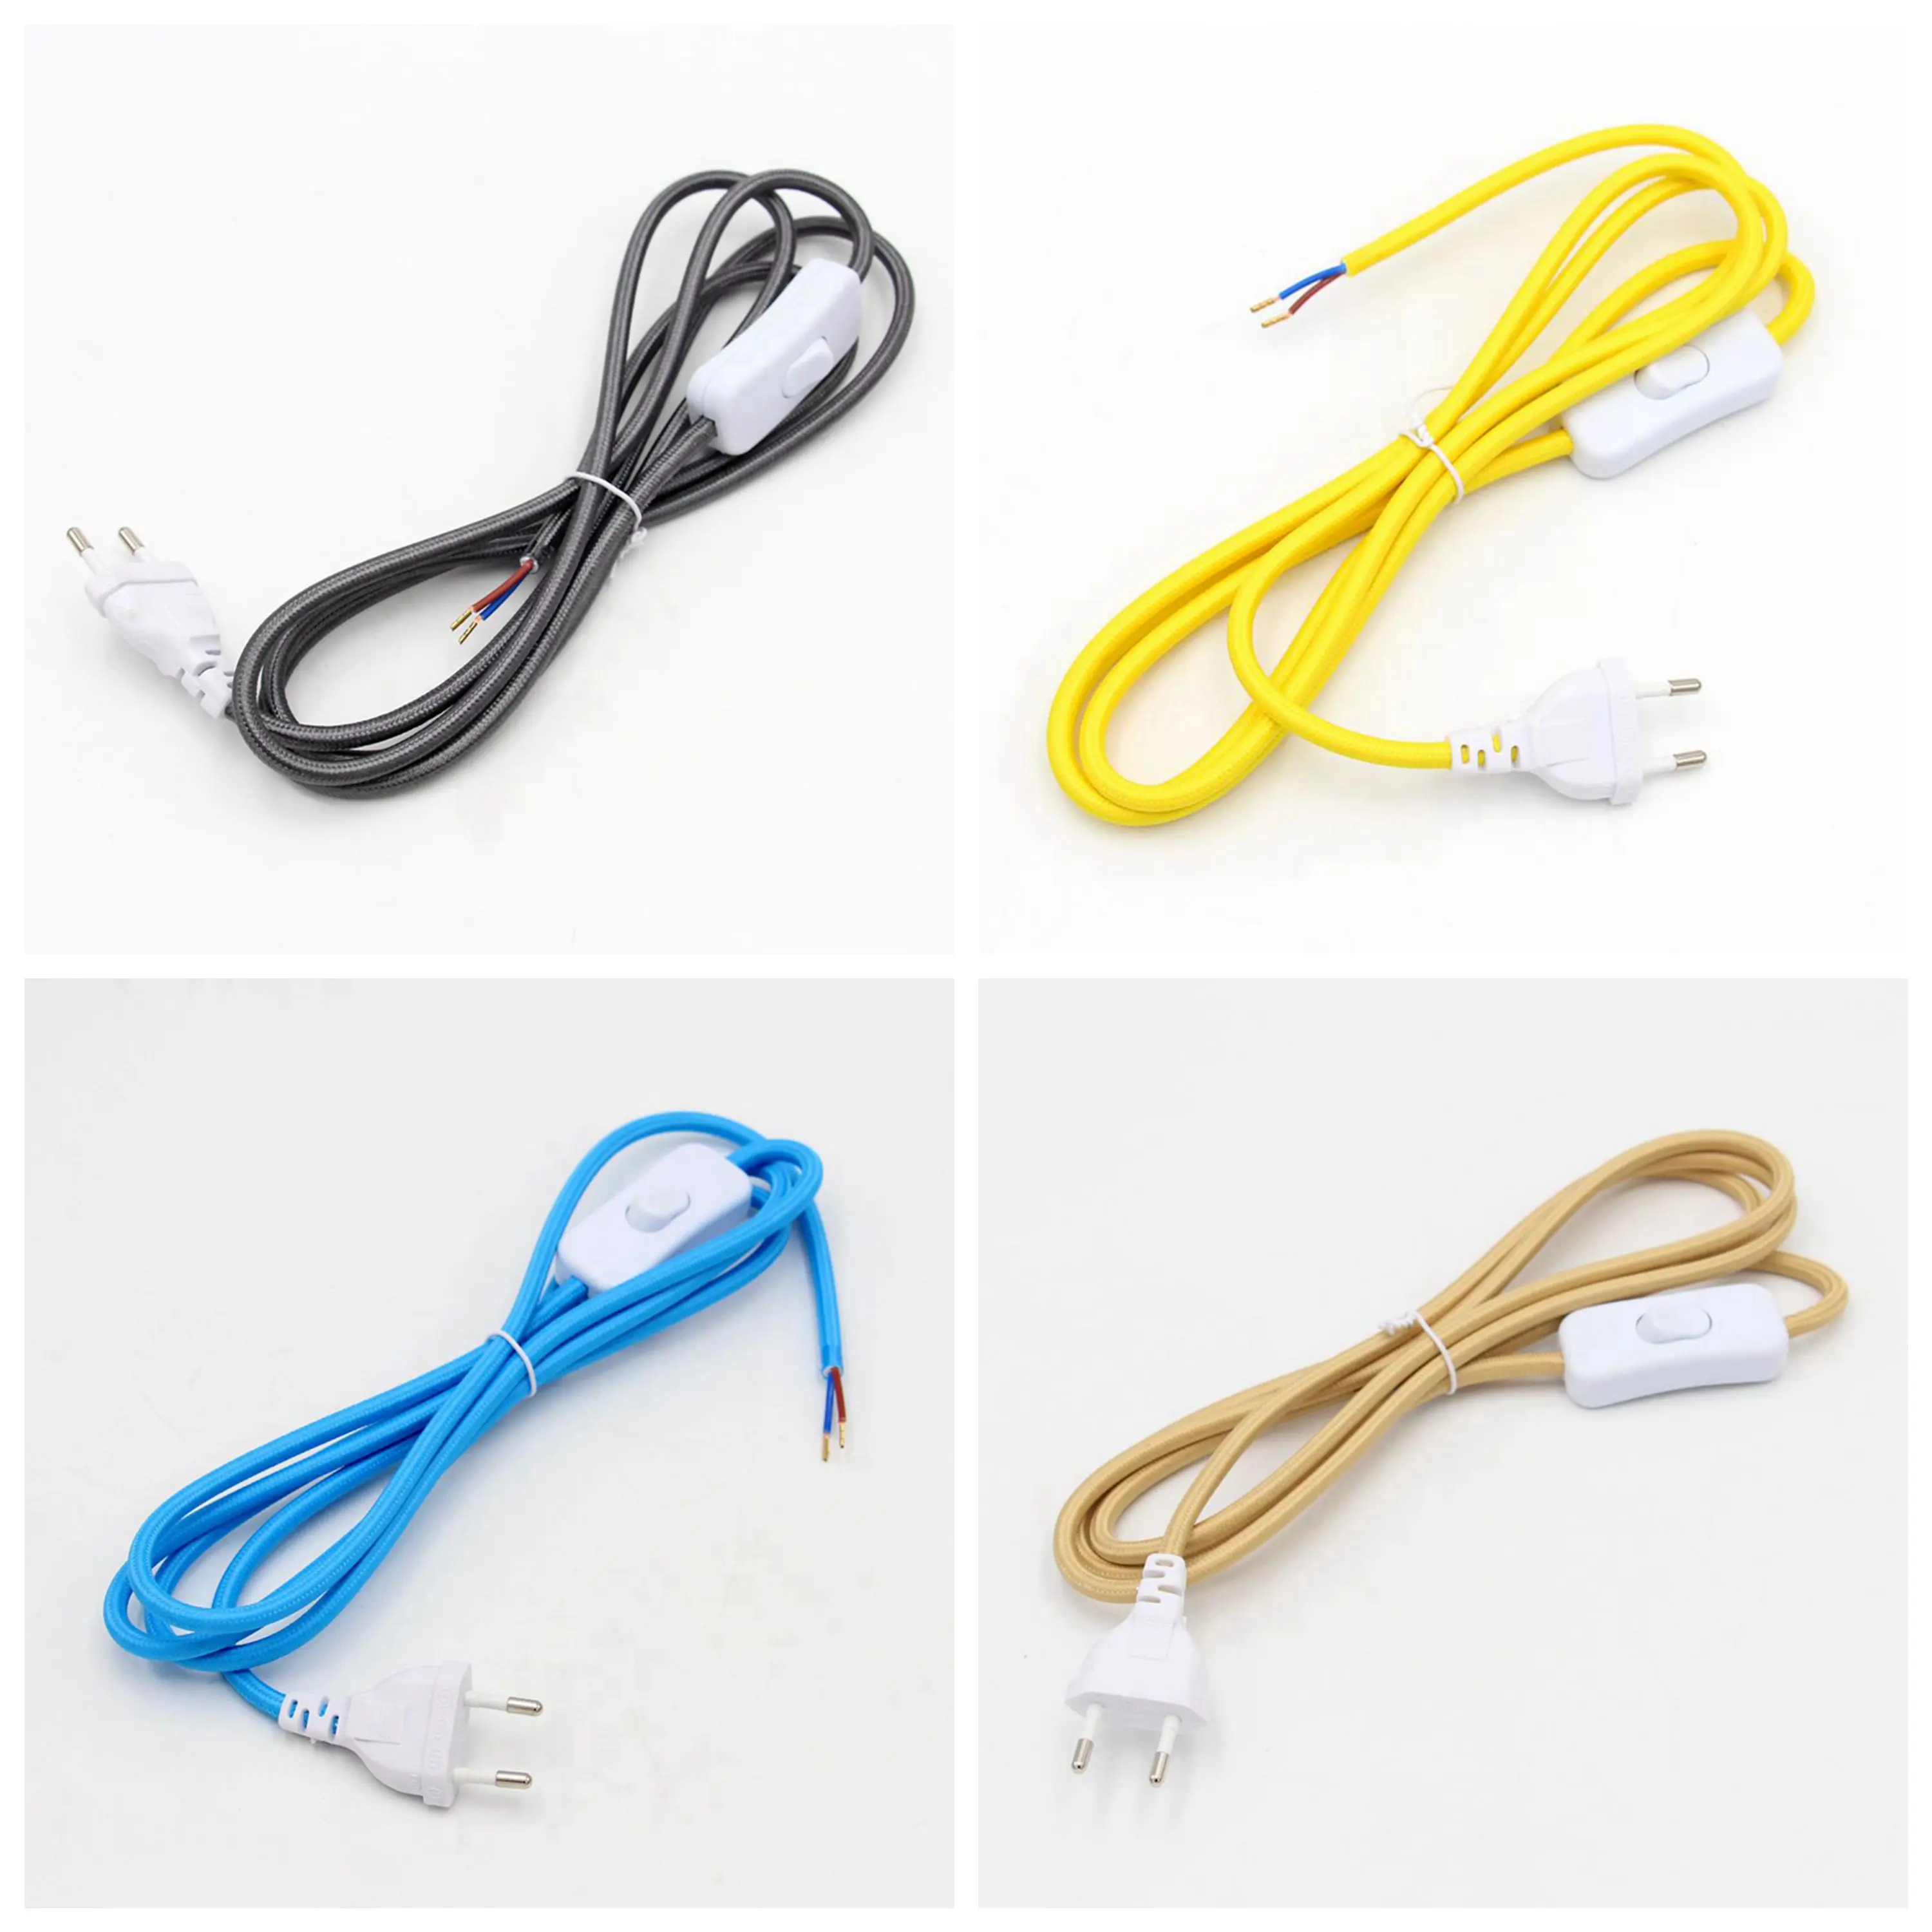 220V AC Power Cord With European Plug Buttom Switch Colourful Fabric Braided Cable 2 Meters